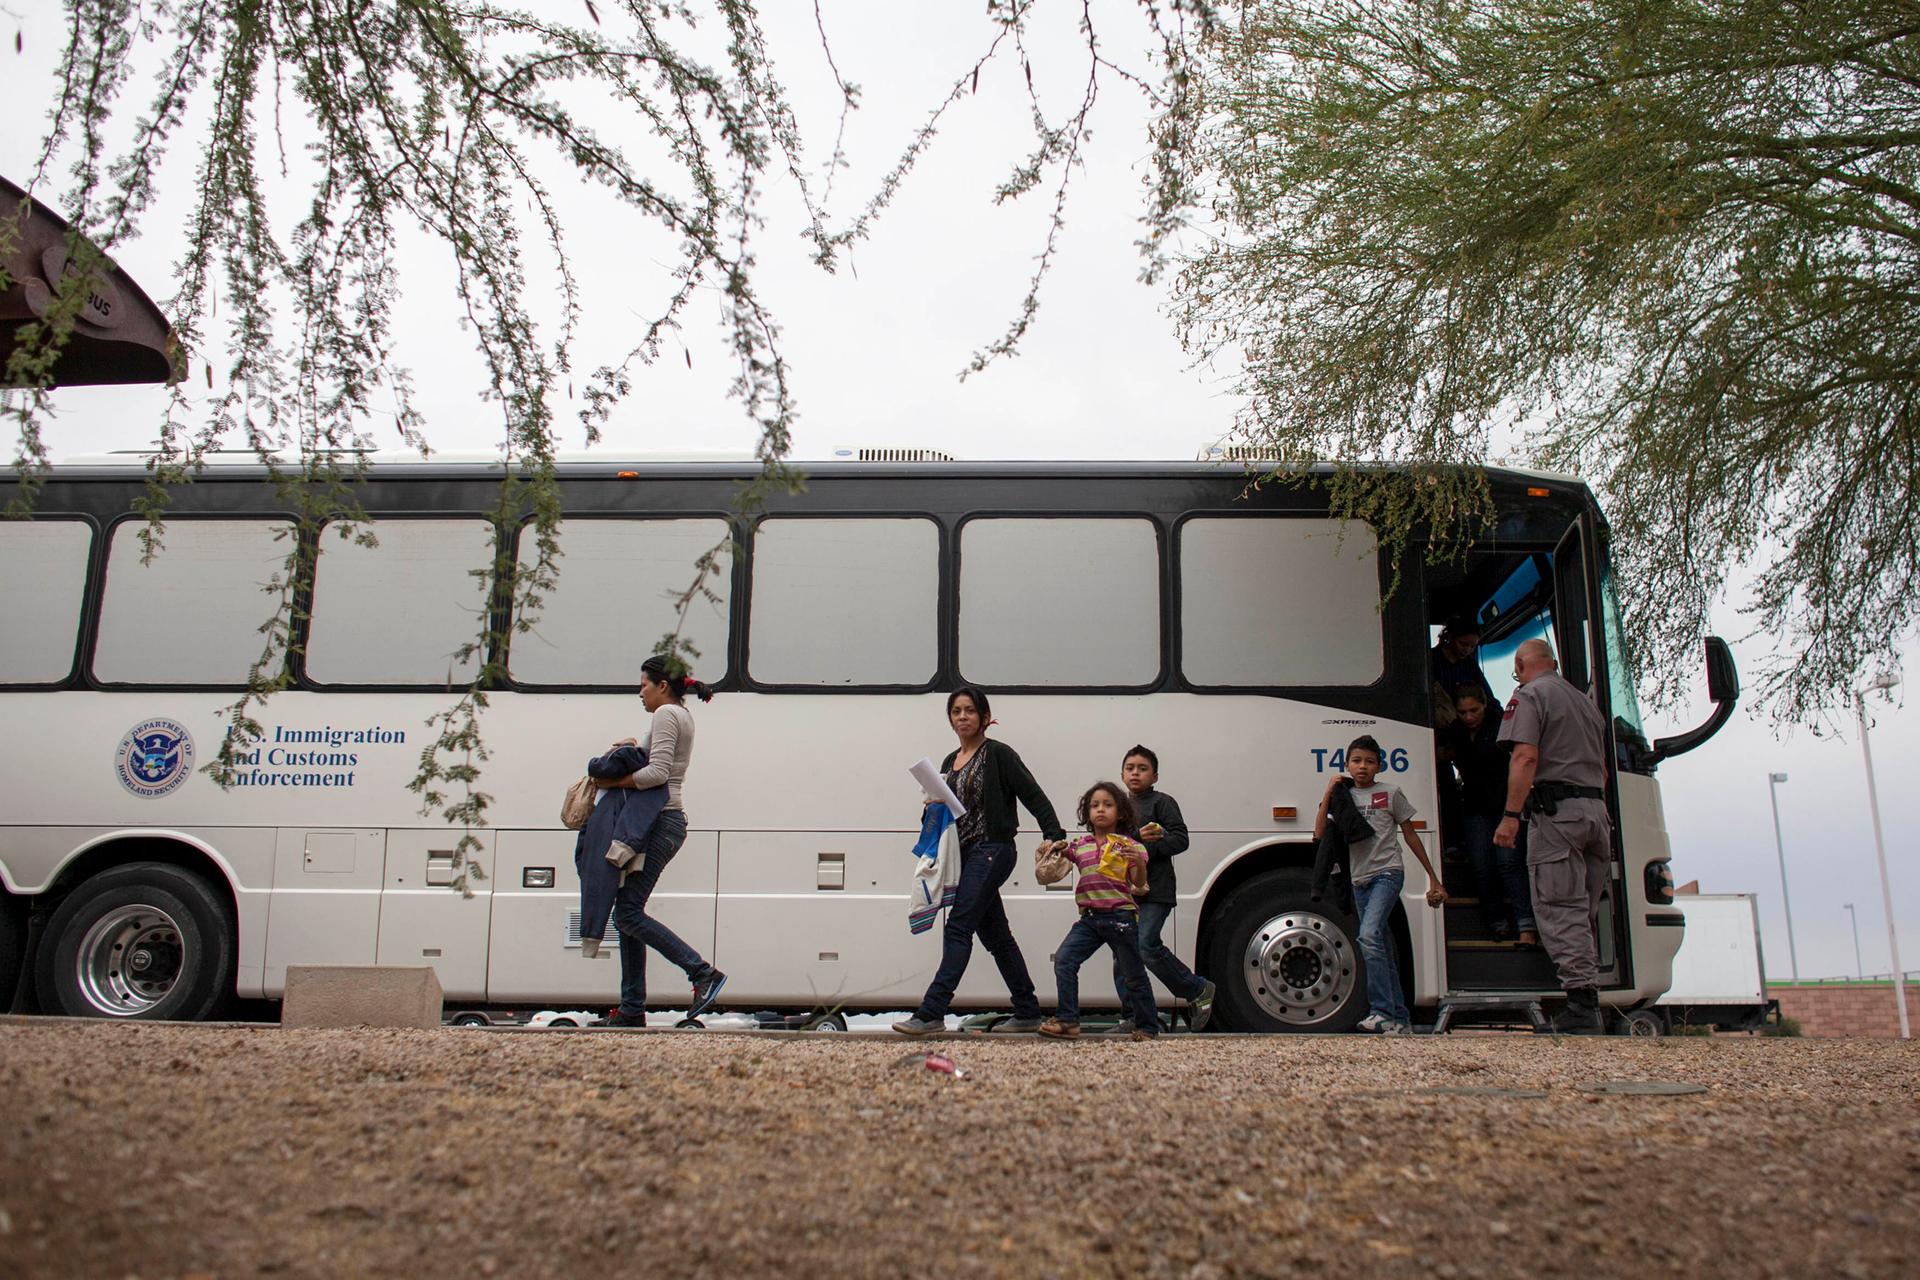 Women and children disembark from a bus marked with the insignia of the ICE